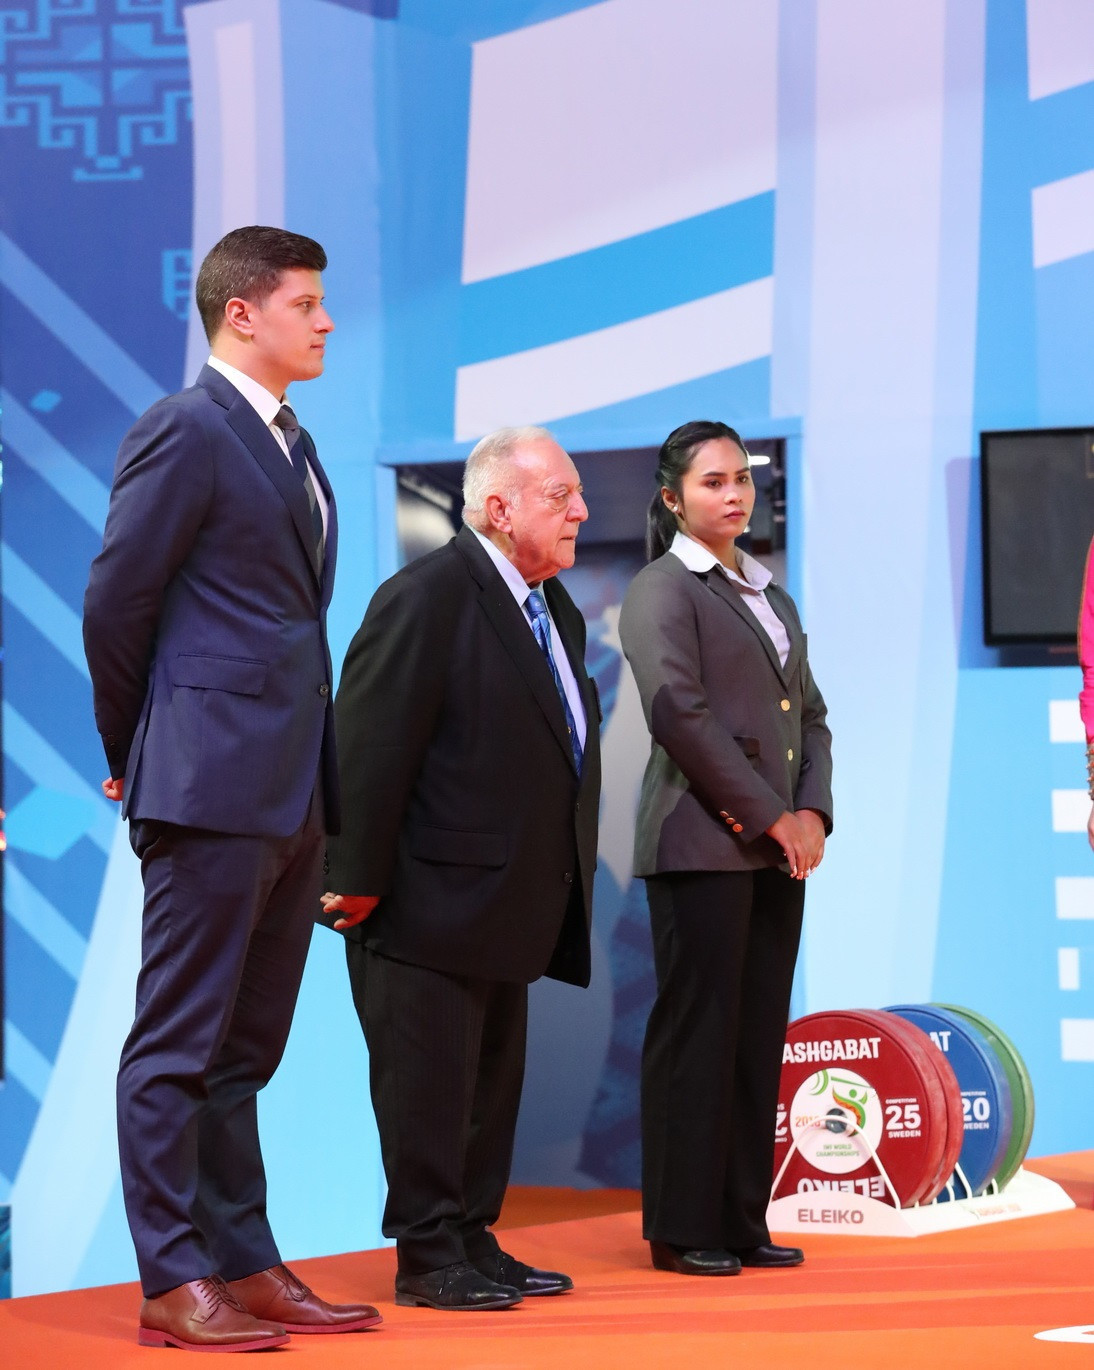 Among those in attendance during the World Championships was IOC member Daniel Gyurta, pictured here on the left next to IWF President Tamás Aján ©IWF